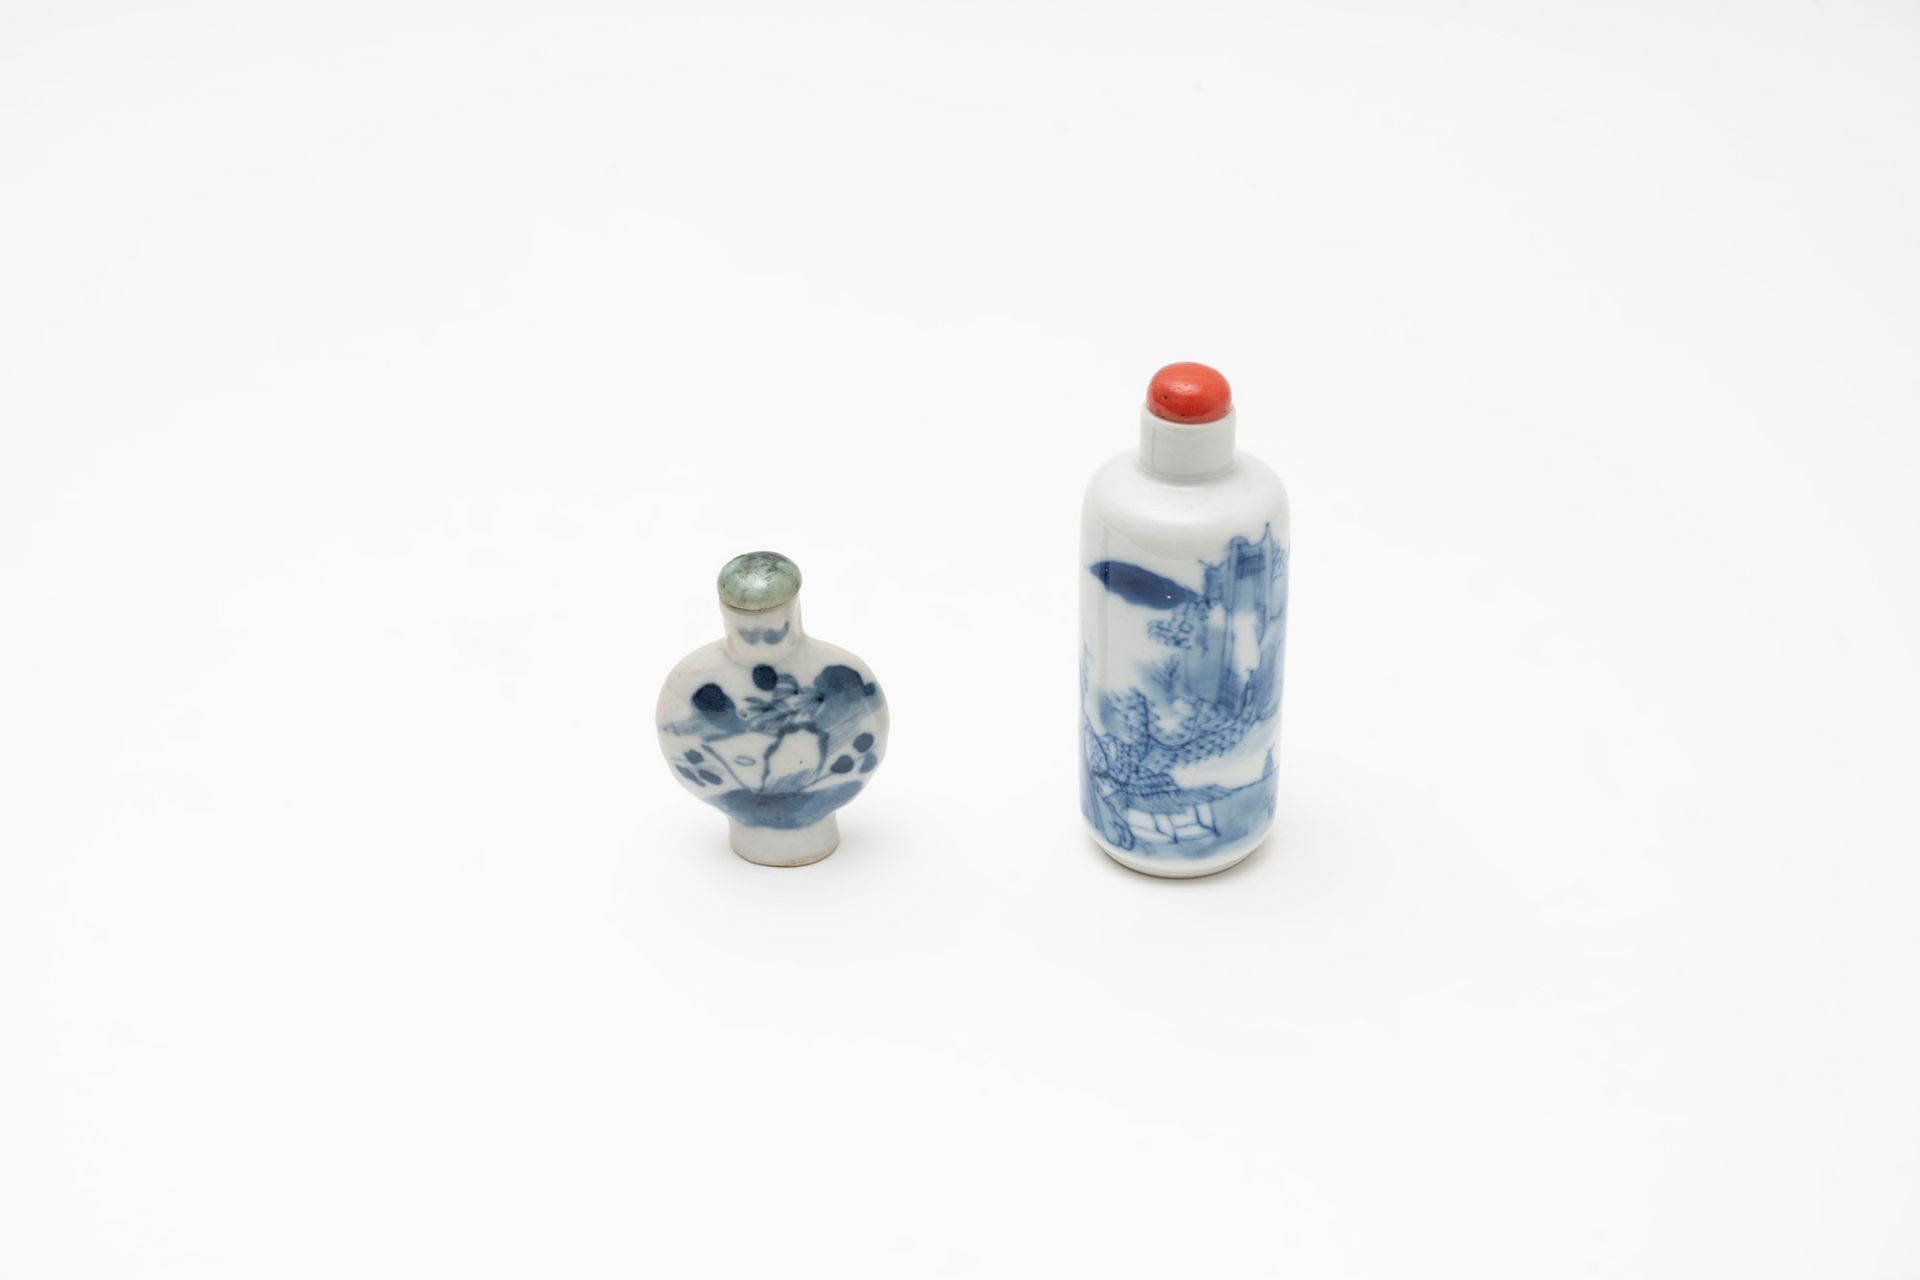 Two blue and white porcelain snuff bottles, China, late 19th century - early 20th century